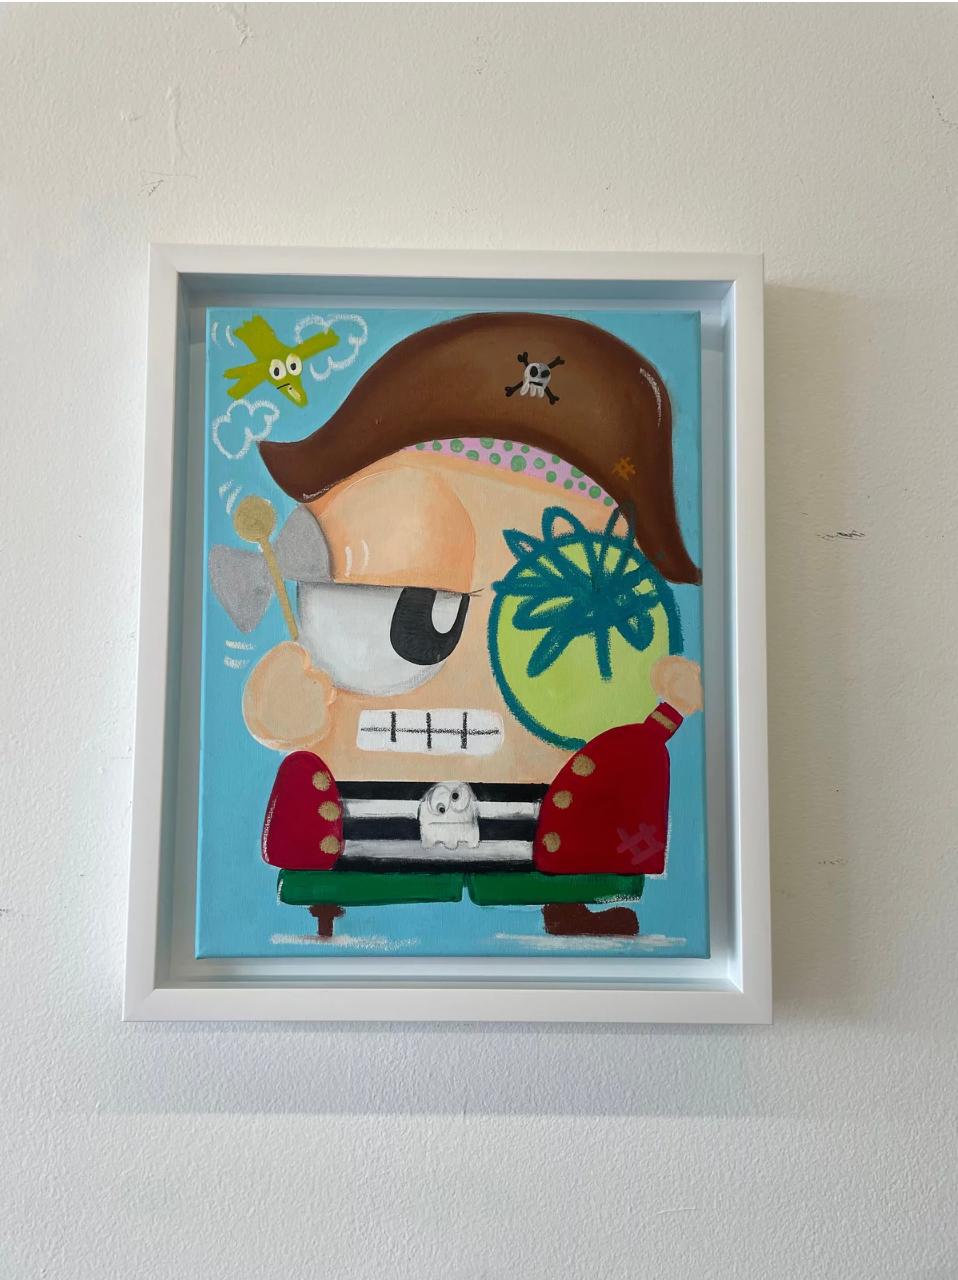 Artist:  Debbie Reda
Title:  Like A Pirate 
Size:   13-3/4 x 10-3/4 inches (34.9 x 27.3 cm)
Medium:  Acrylic, Pencil, and Oil Stick on Canvas
Edition:  Original 
Year: 2021
Notes: Signed, dated, and titled on reverse: Like A Pirate / Debbie / REDA